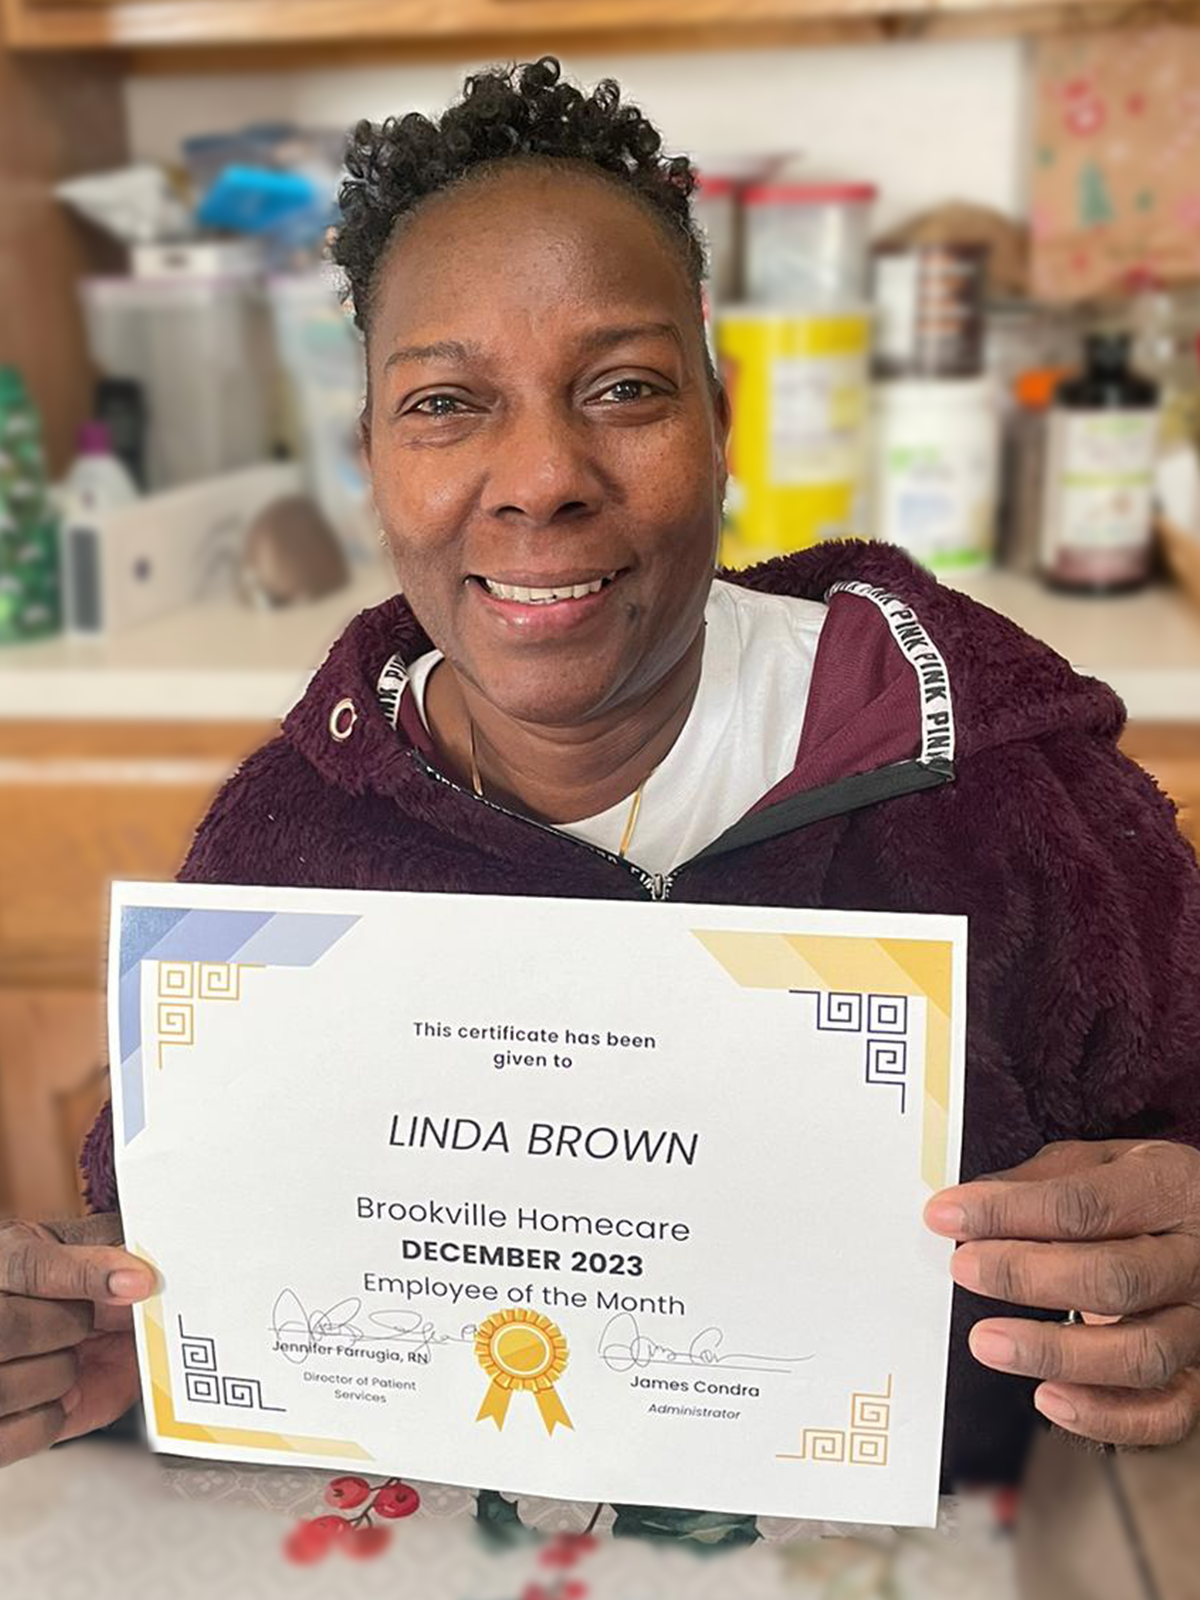 December 2023 Employee of the Month: LINDA BROWN